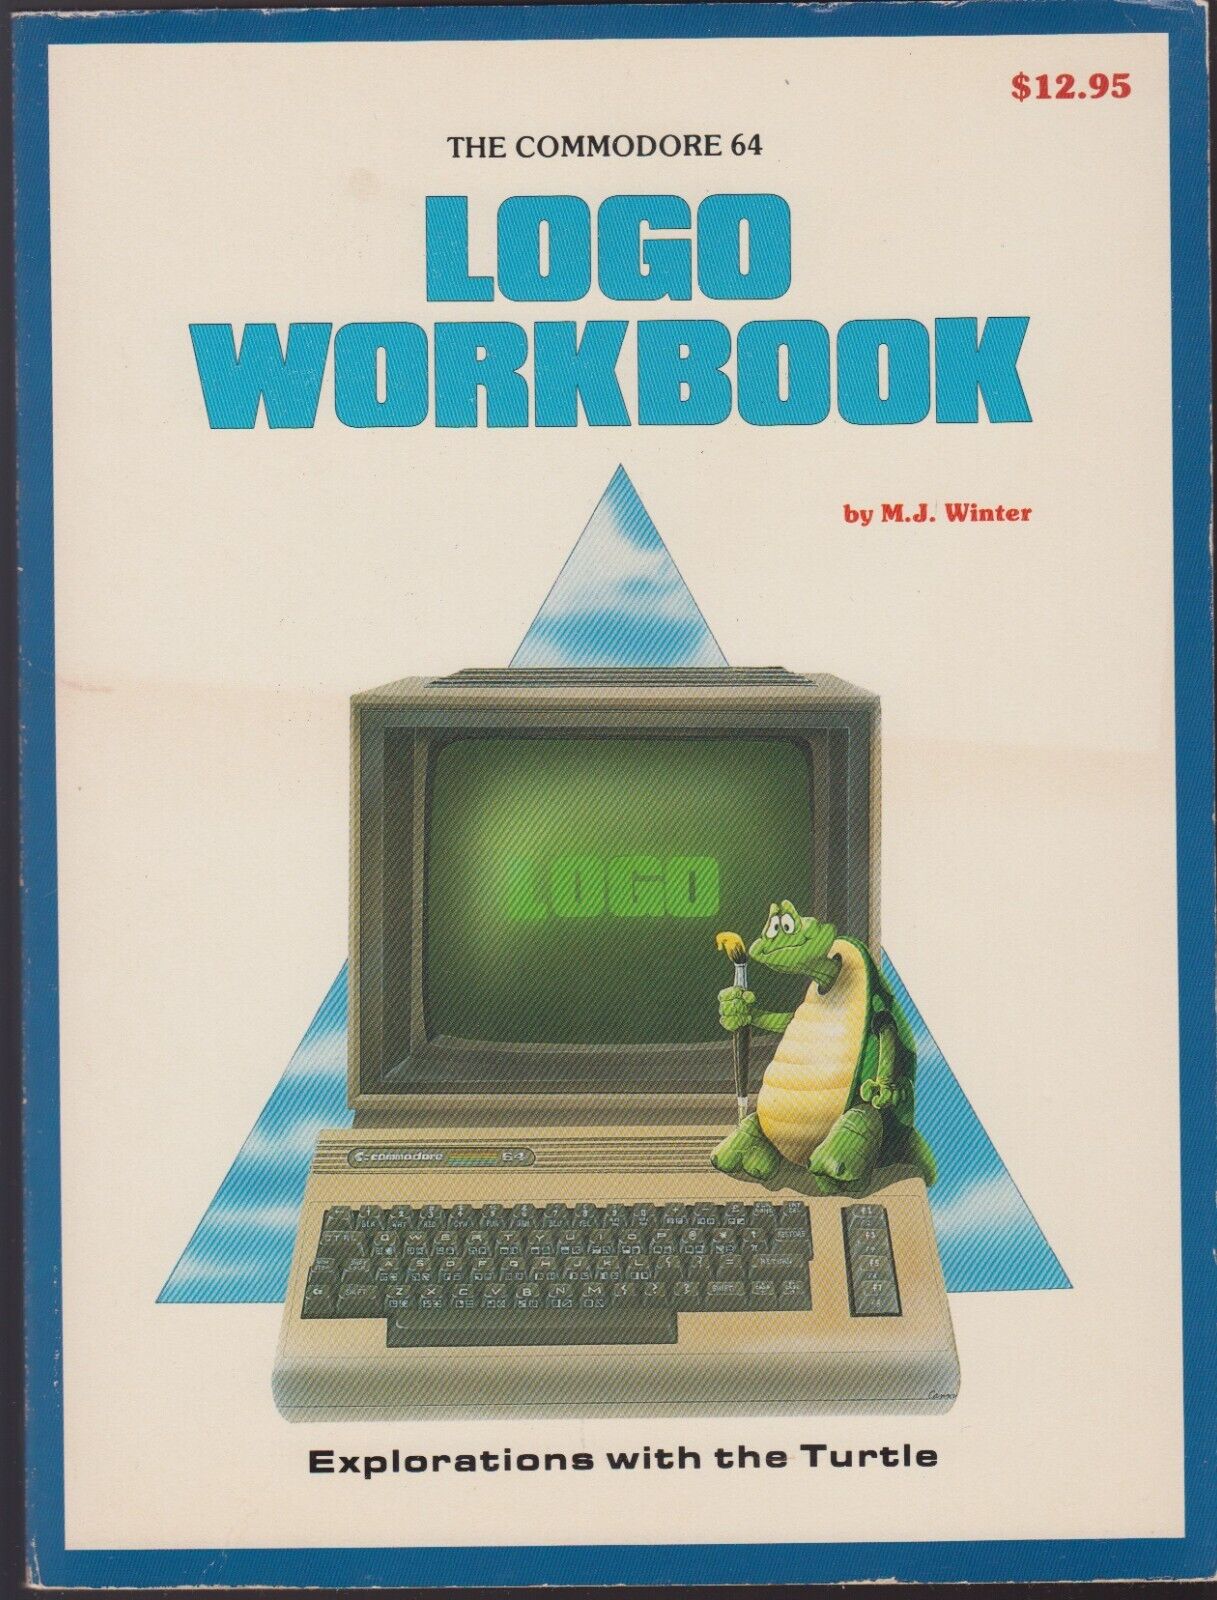 COMMODORE 64 LOGO WORKBOOK M J Winter explorations with Turtle 1984 paperback